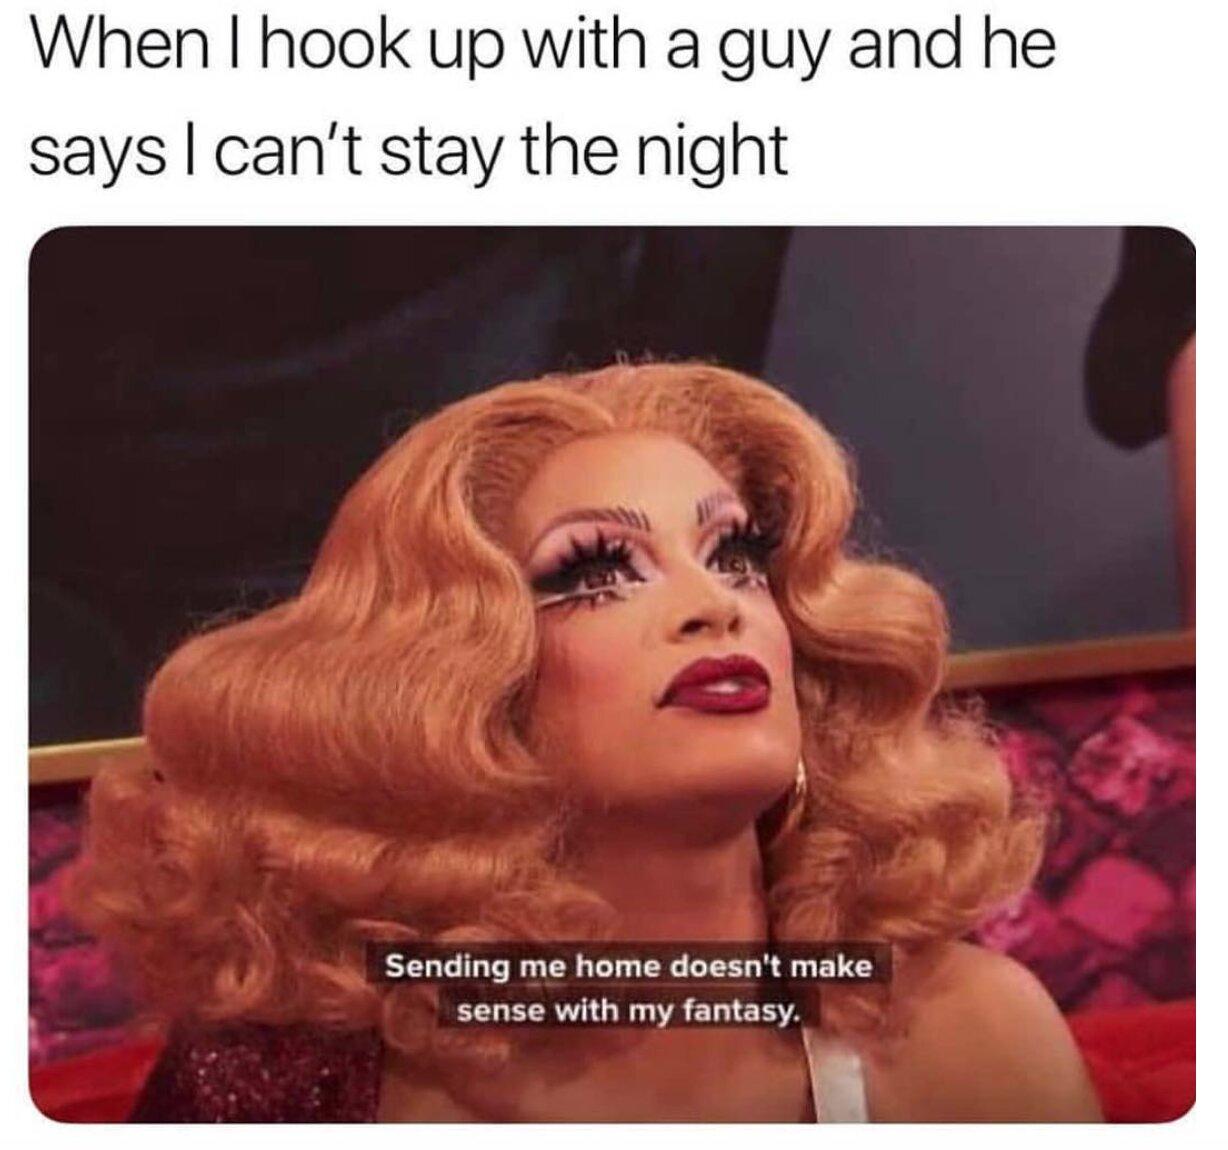 The Best 'RuPaul's Drag Race' Memes Are on These Instagram Accounts